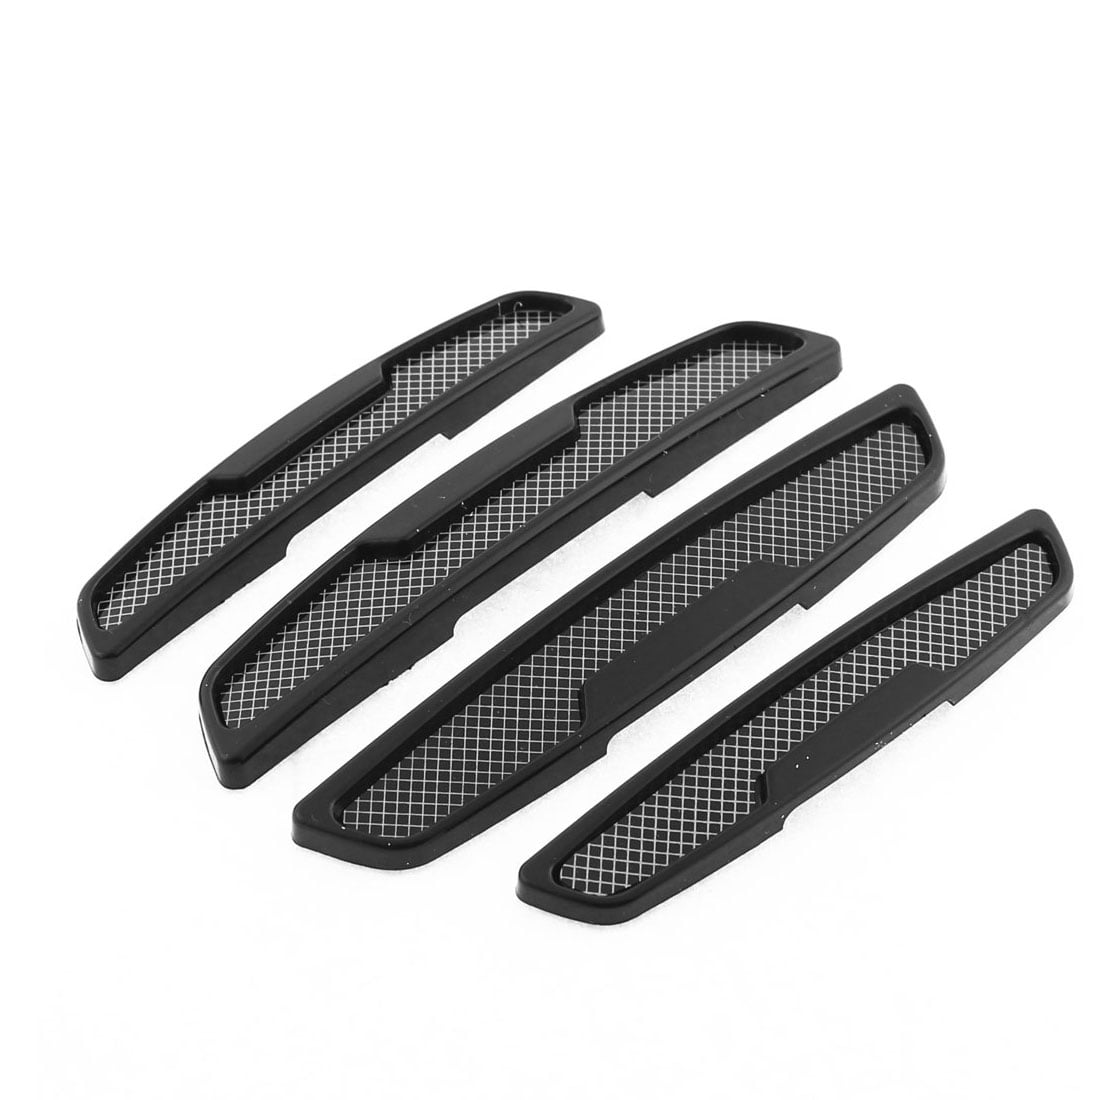 4x Heavy Duty Long Bumper Guard Front Rear Corner Car Protection Extra Large NEW 